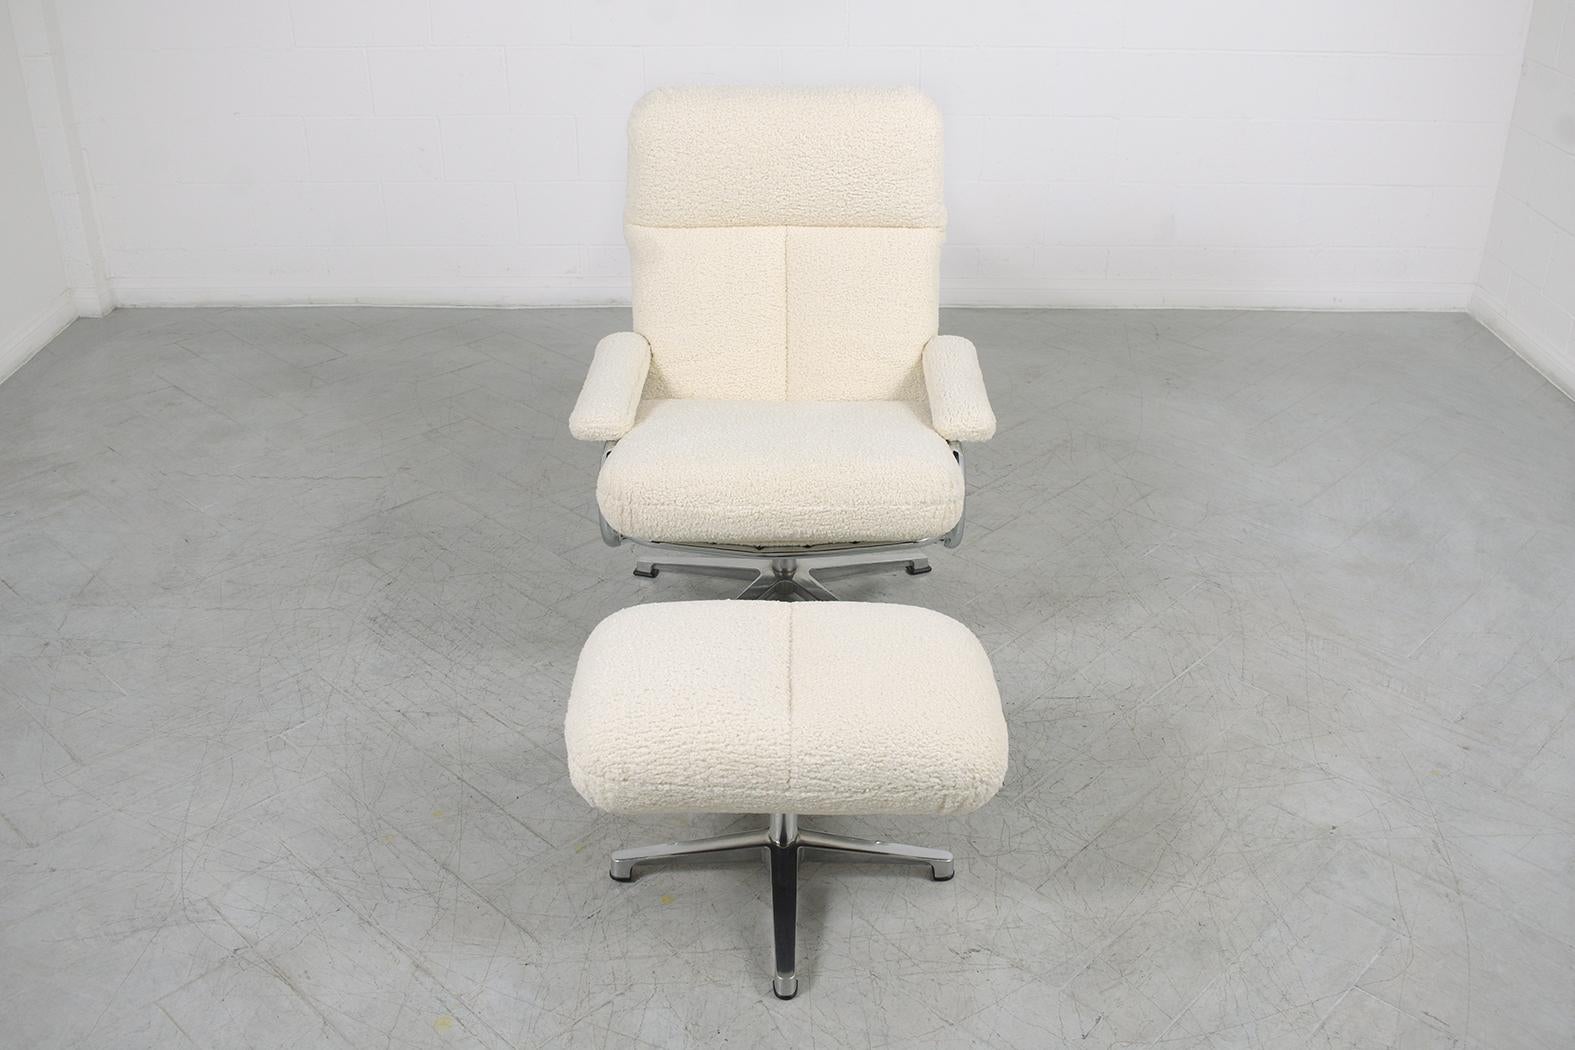 1970s Chrome-Plated Recliner Chair & Ottoman: Mid-Century Modern Revived For Sale 2